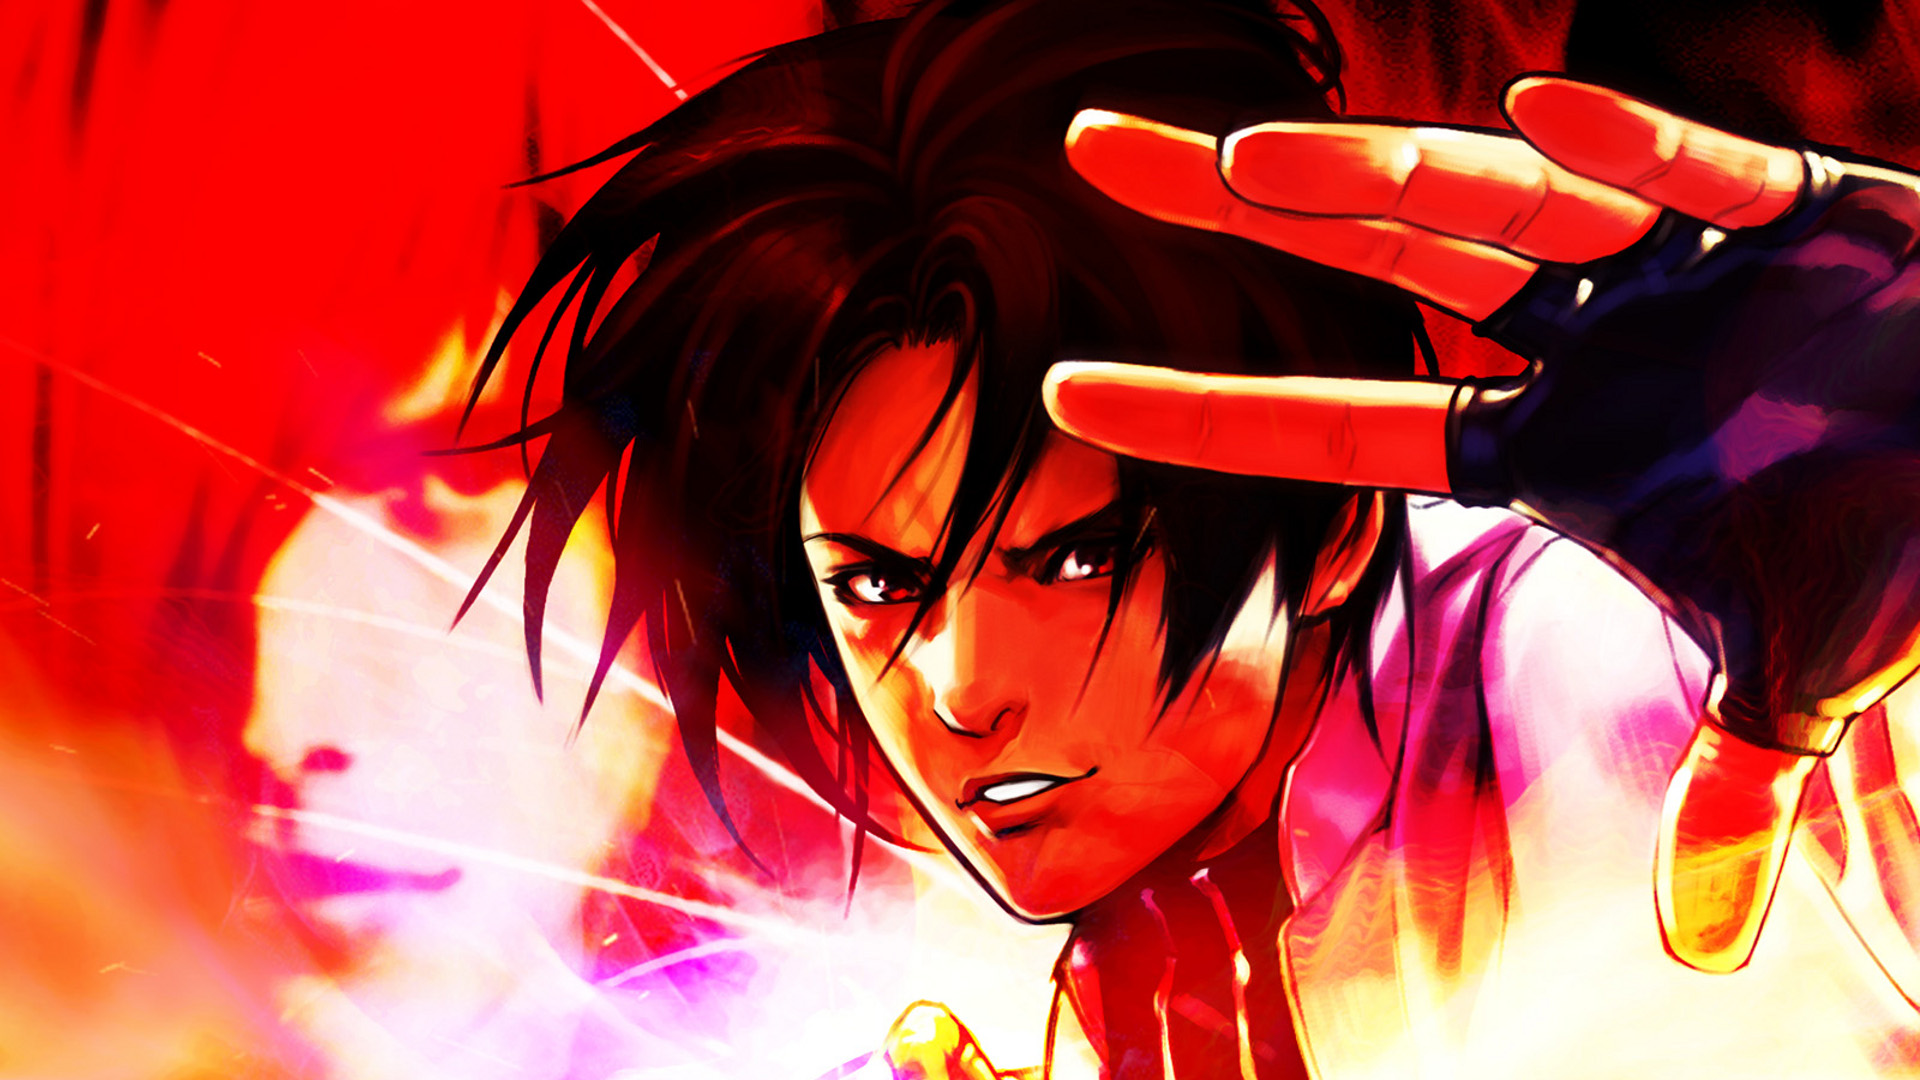 The King of Fighters EX 2: Howling Blood